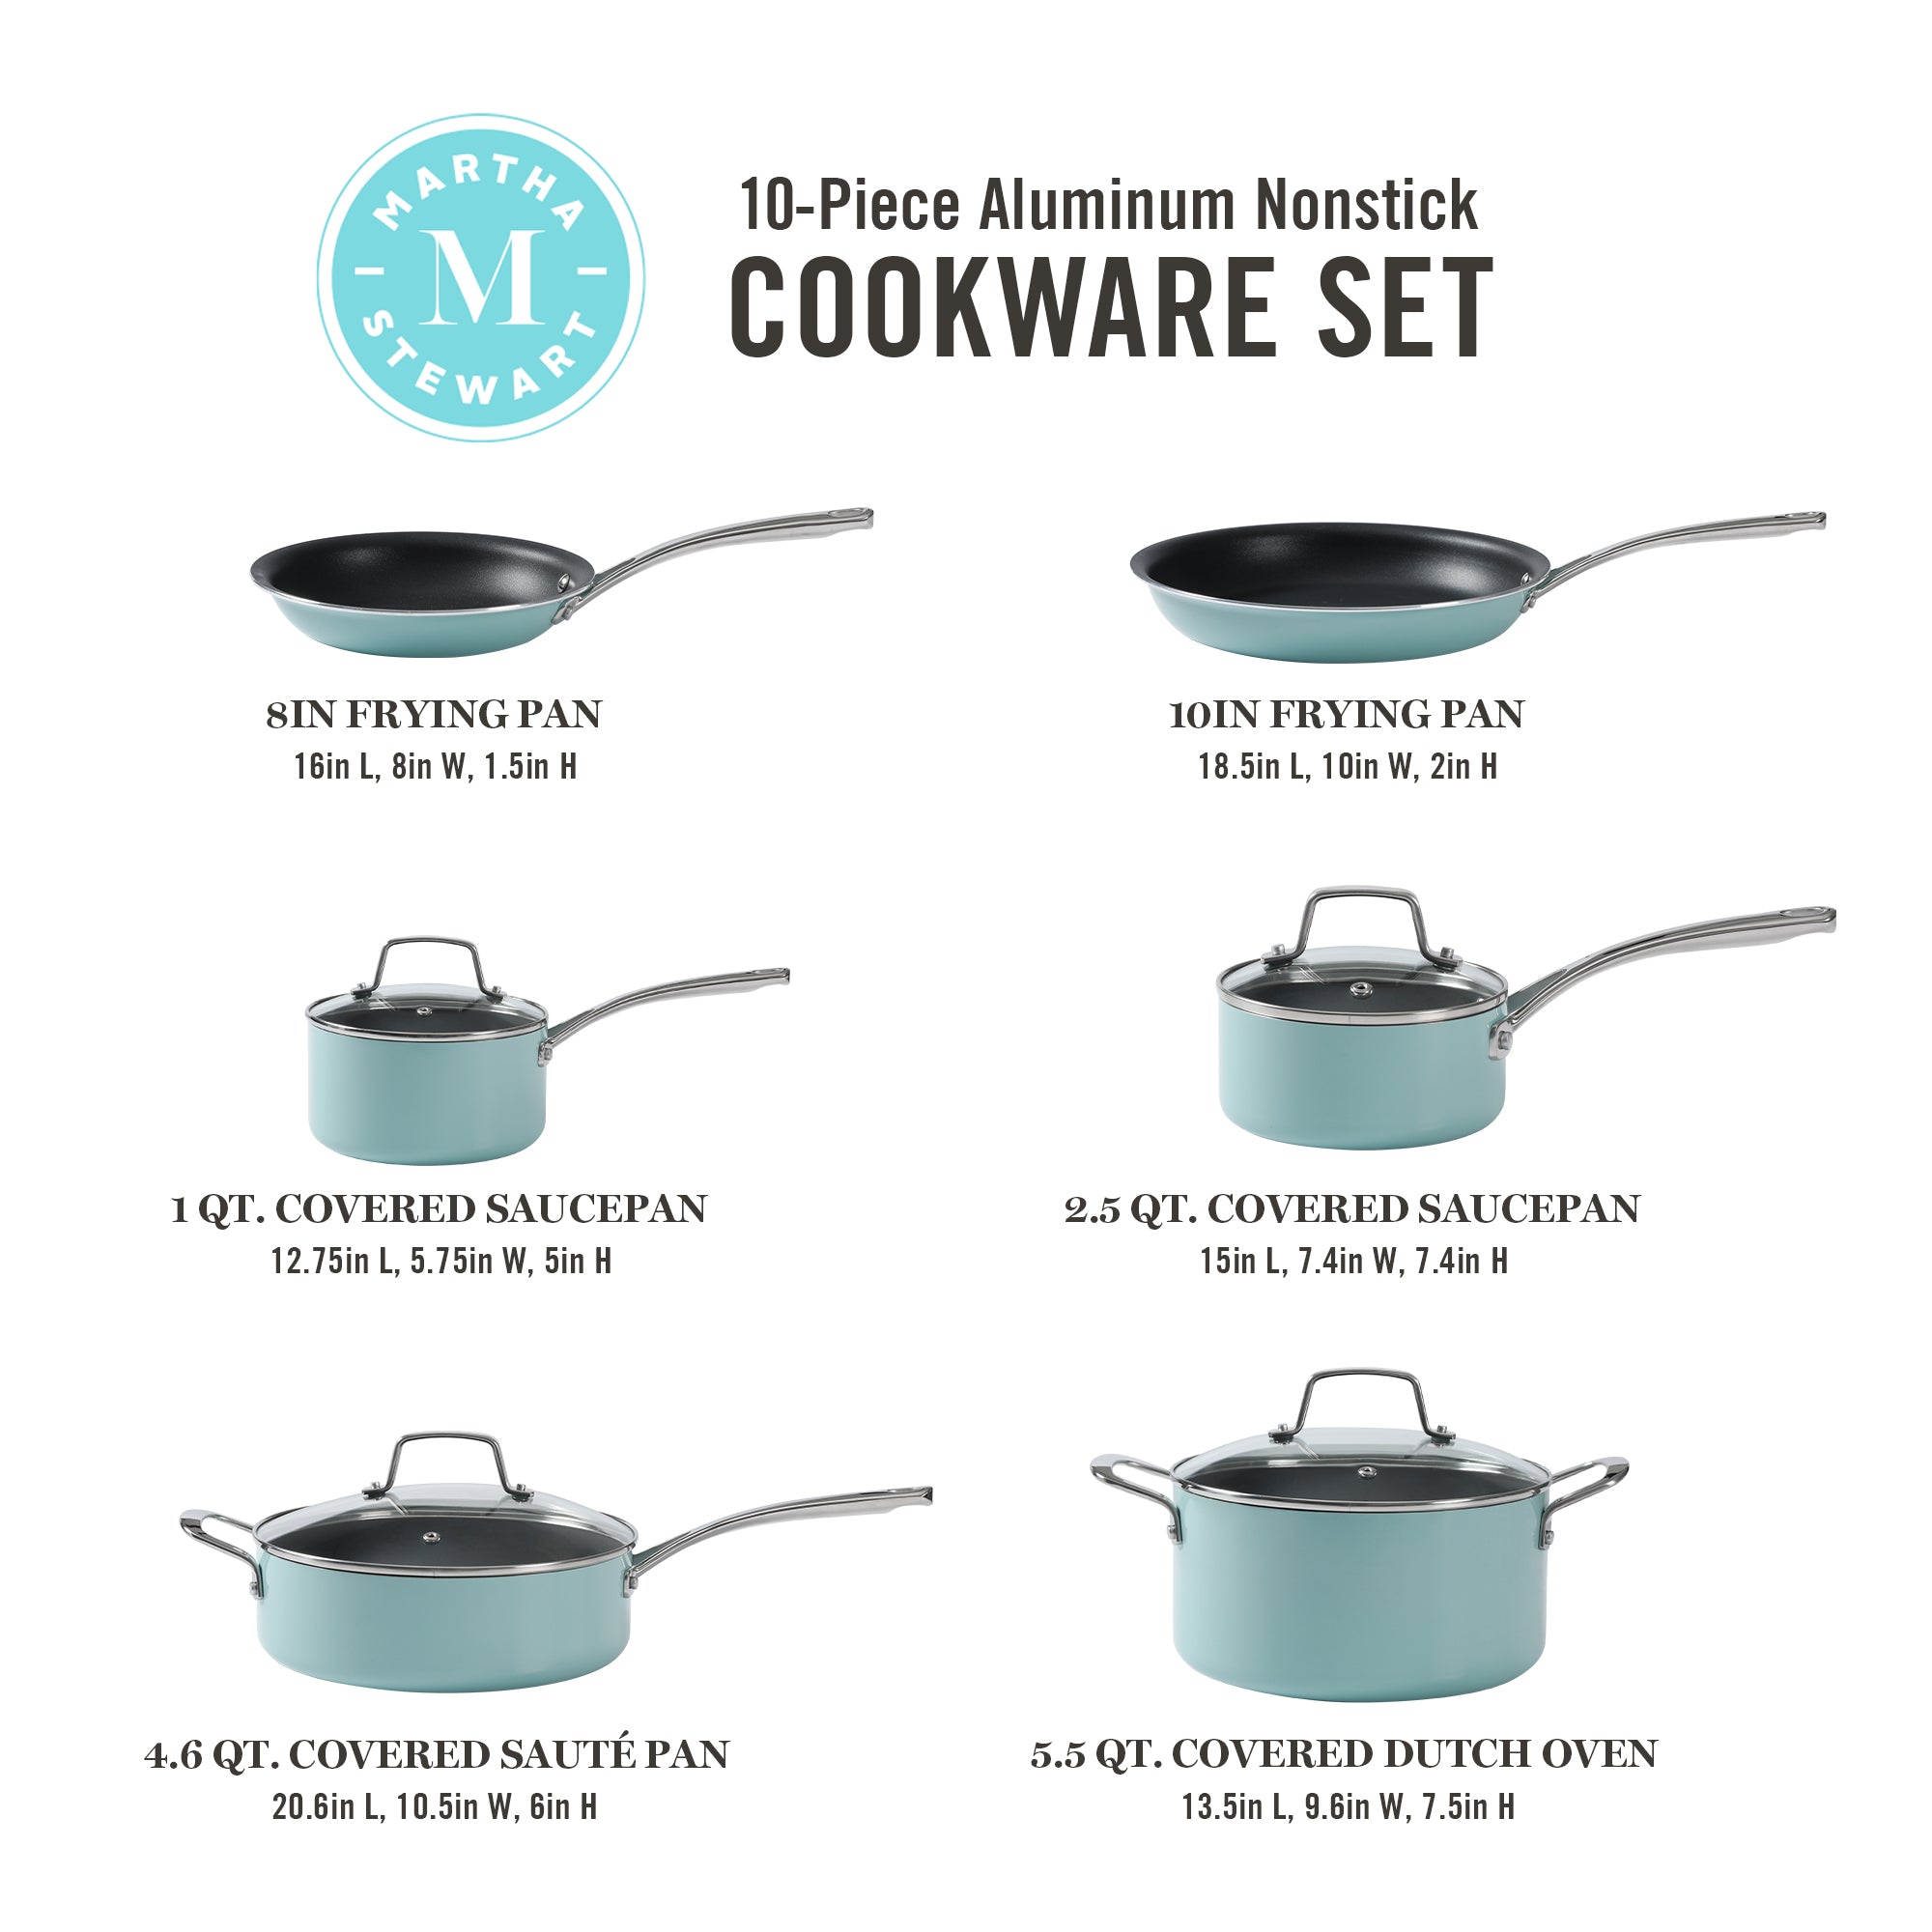 8 PC Enameled Cast Iron Cookware Set - Agave